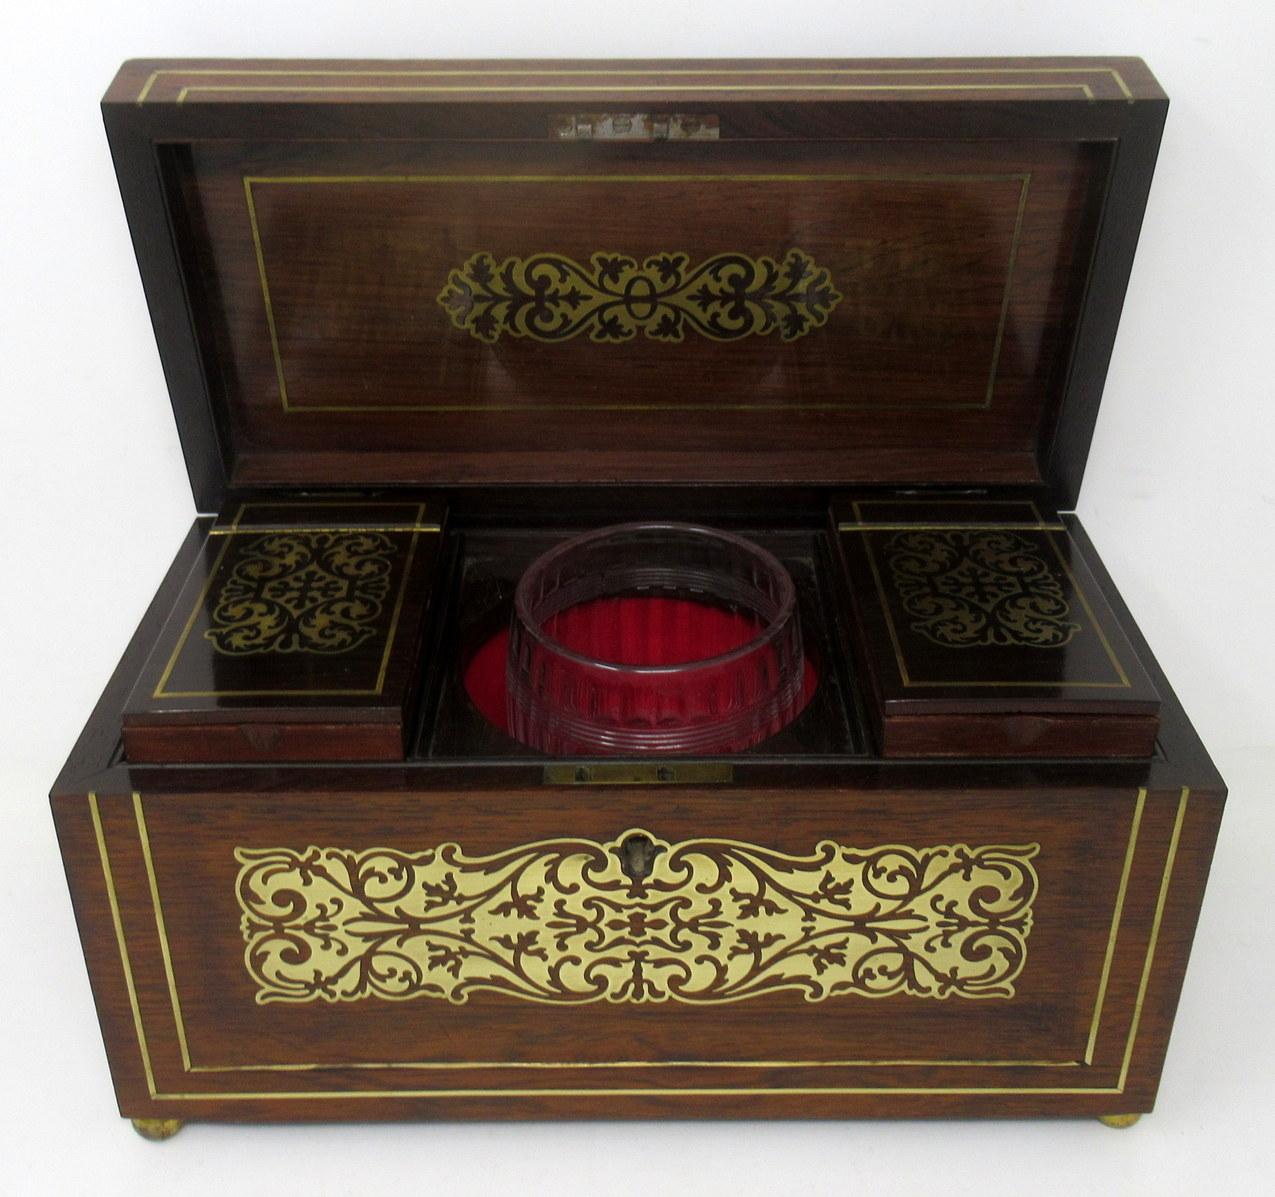 Antique Brass Inlaid English Regency Mahogany Double Tea Caddy Box 19th Century In Good Condition For Sale In Dublin, Ireland